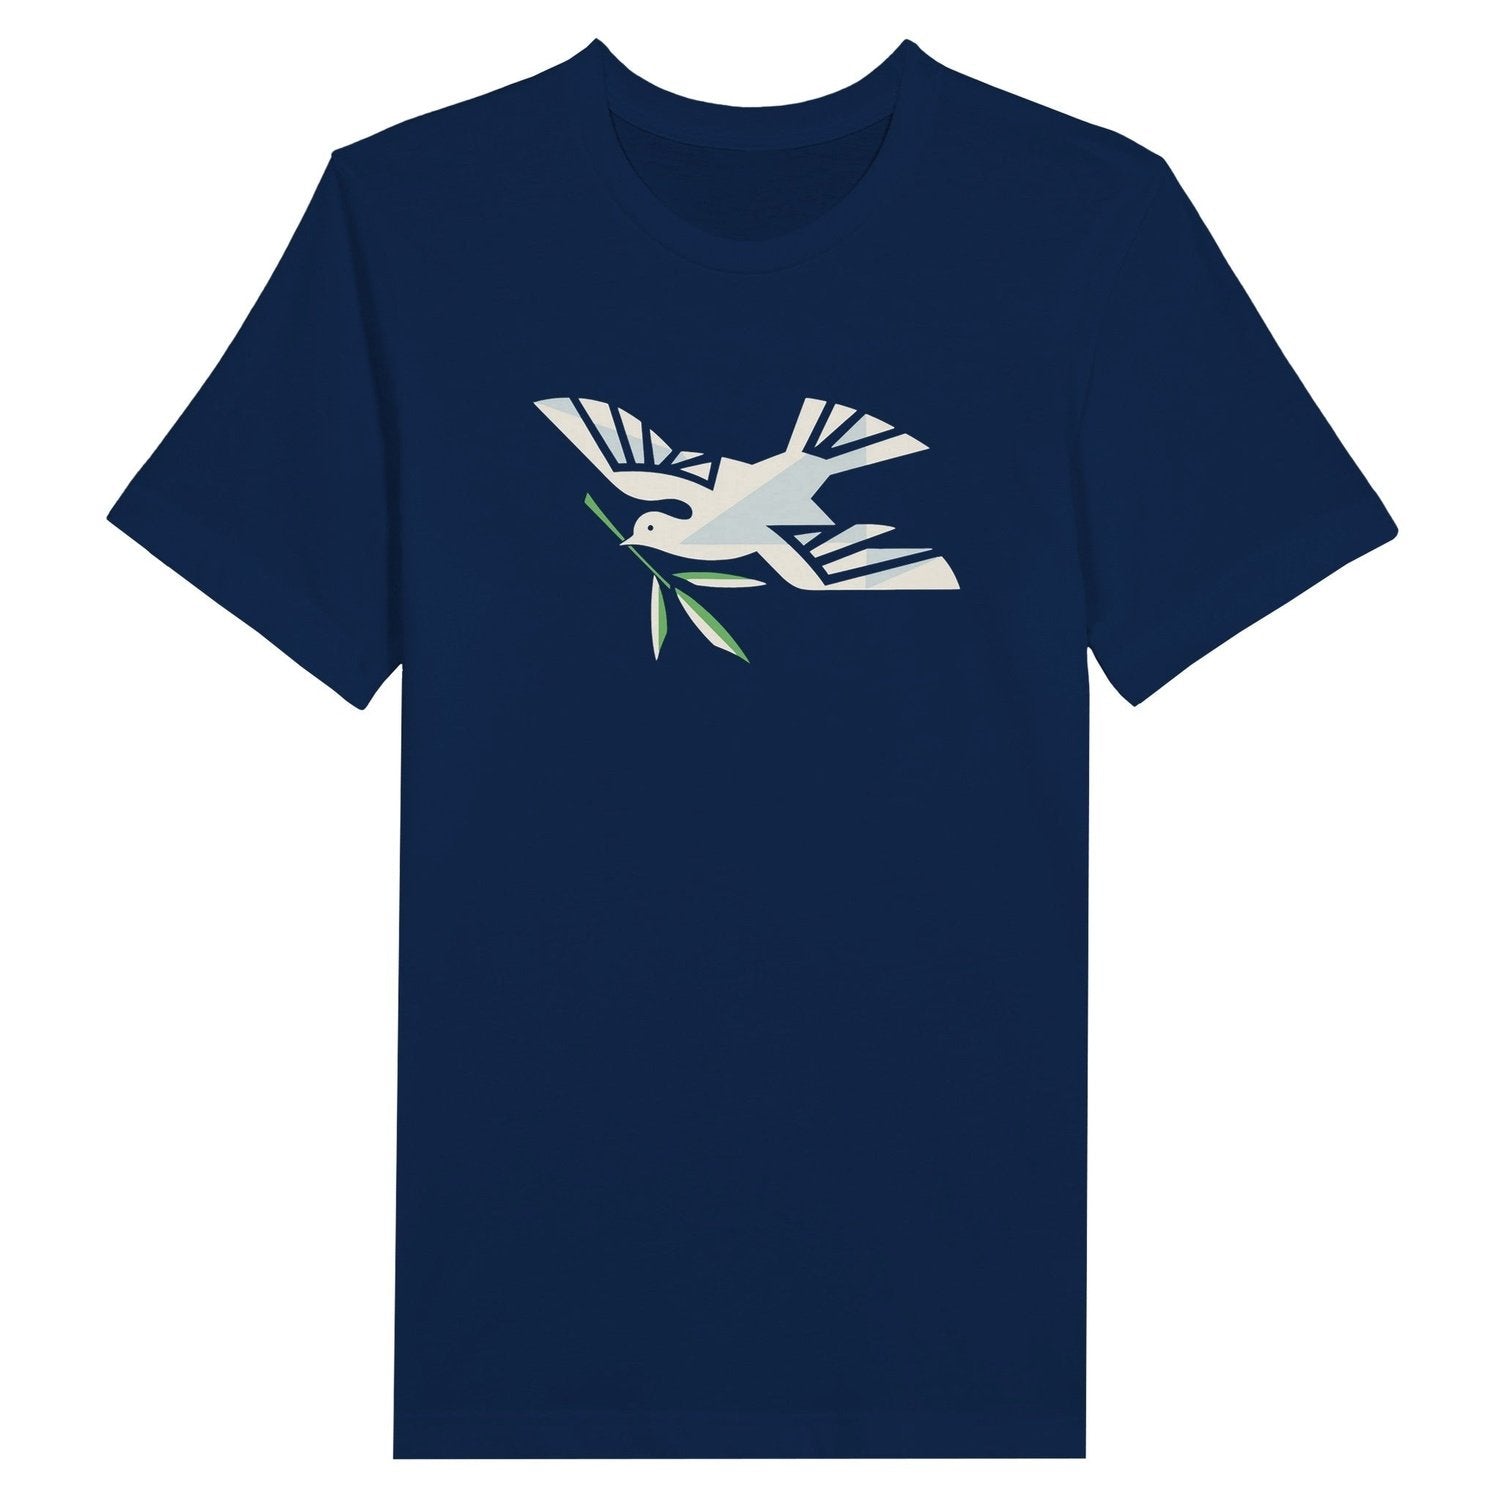 An image of The Dove | Premium Unisex Christian T-shirt available at 3rd Day Christian Clothing UK